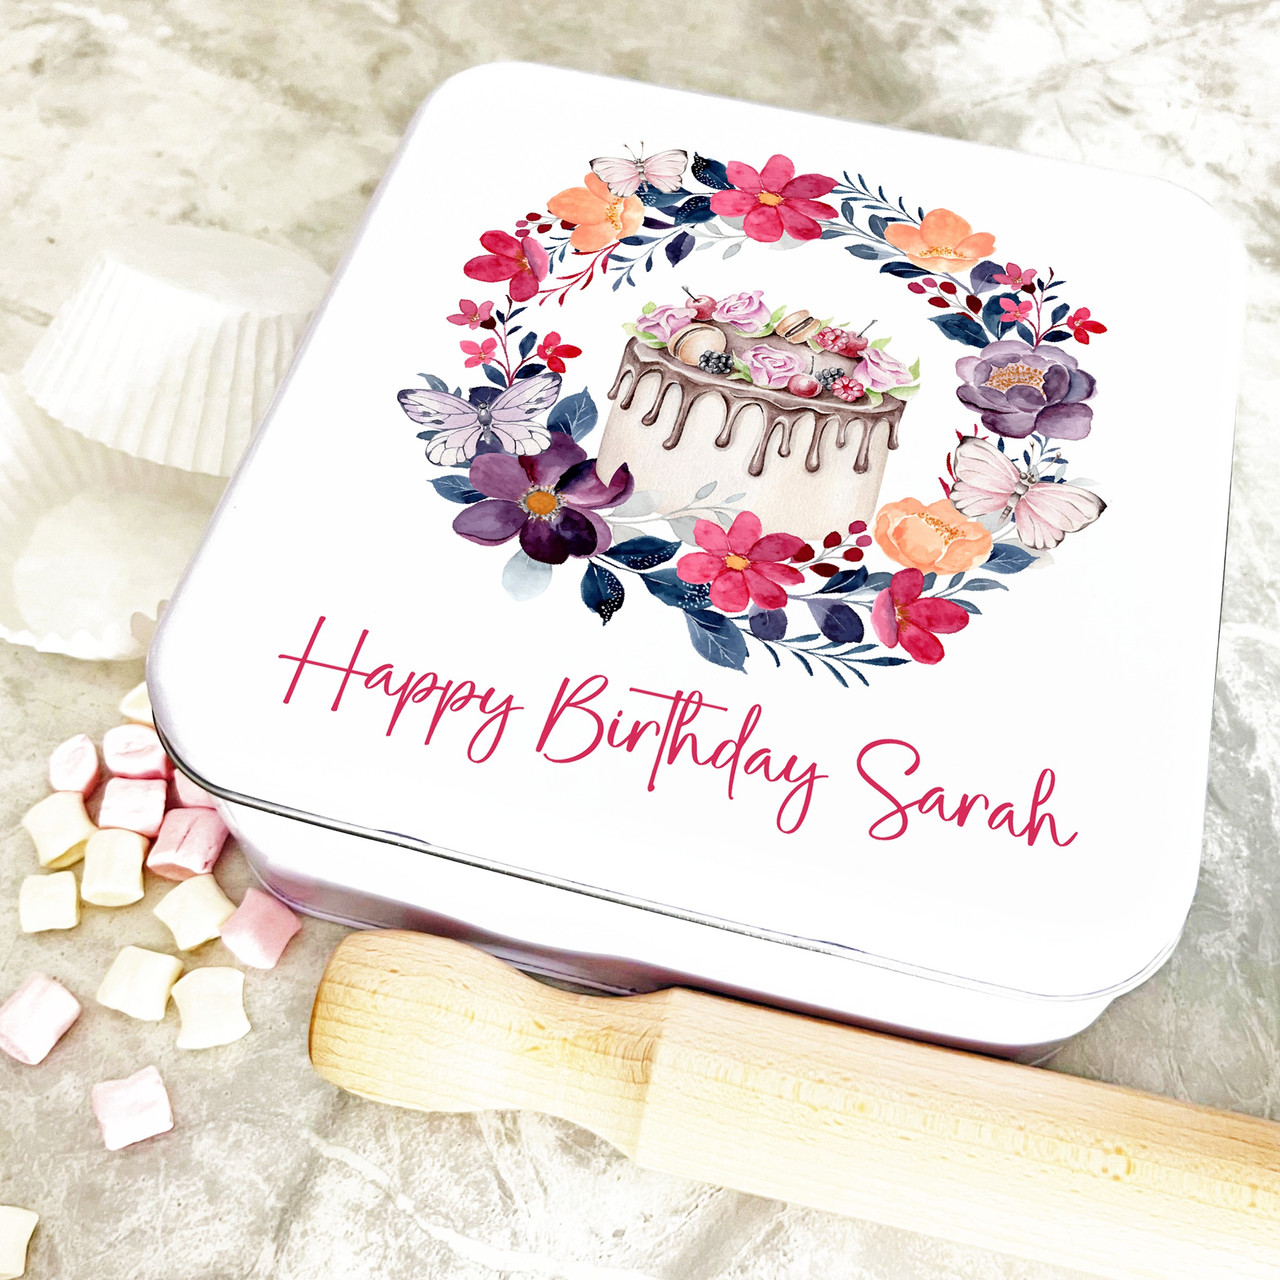 Round Pastry Cakes Anniversary Personalised Cake Tin - The Card Zoo